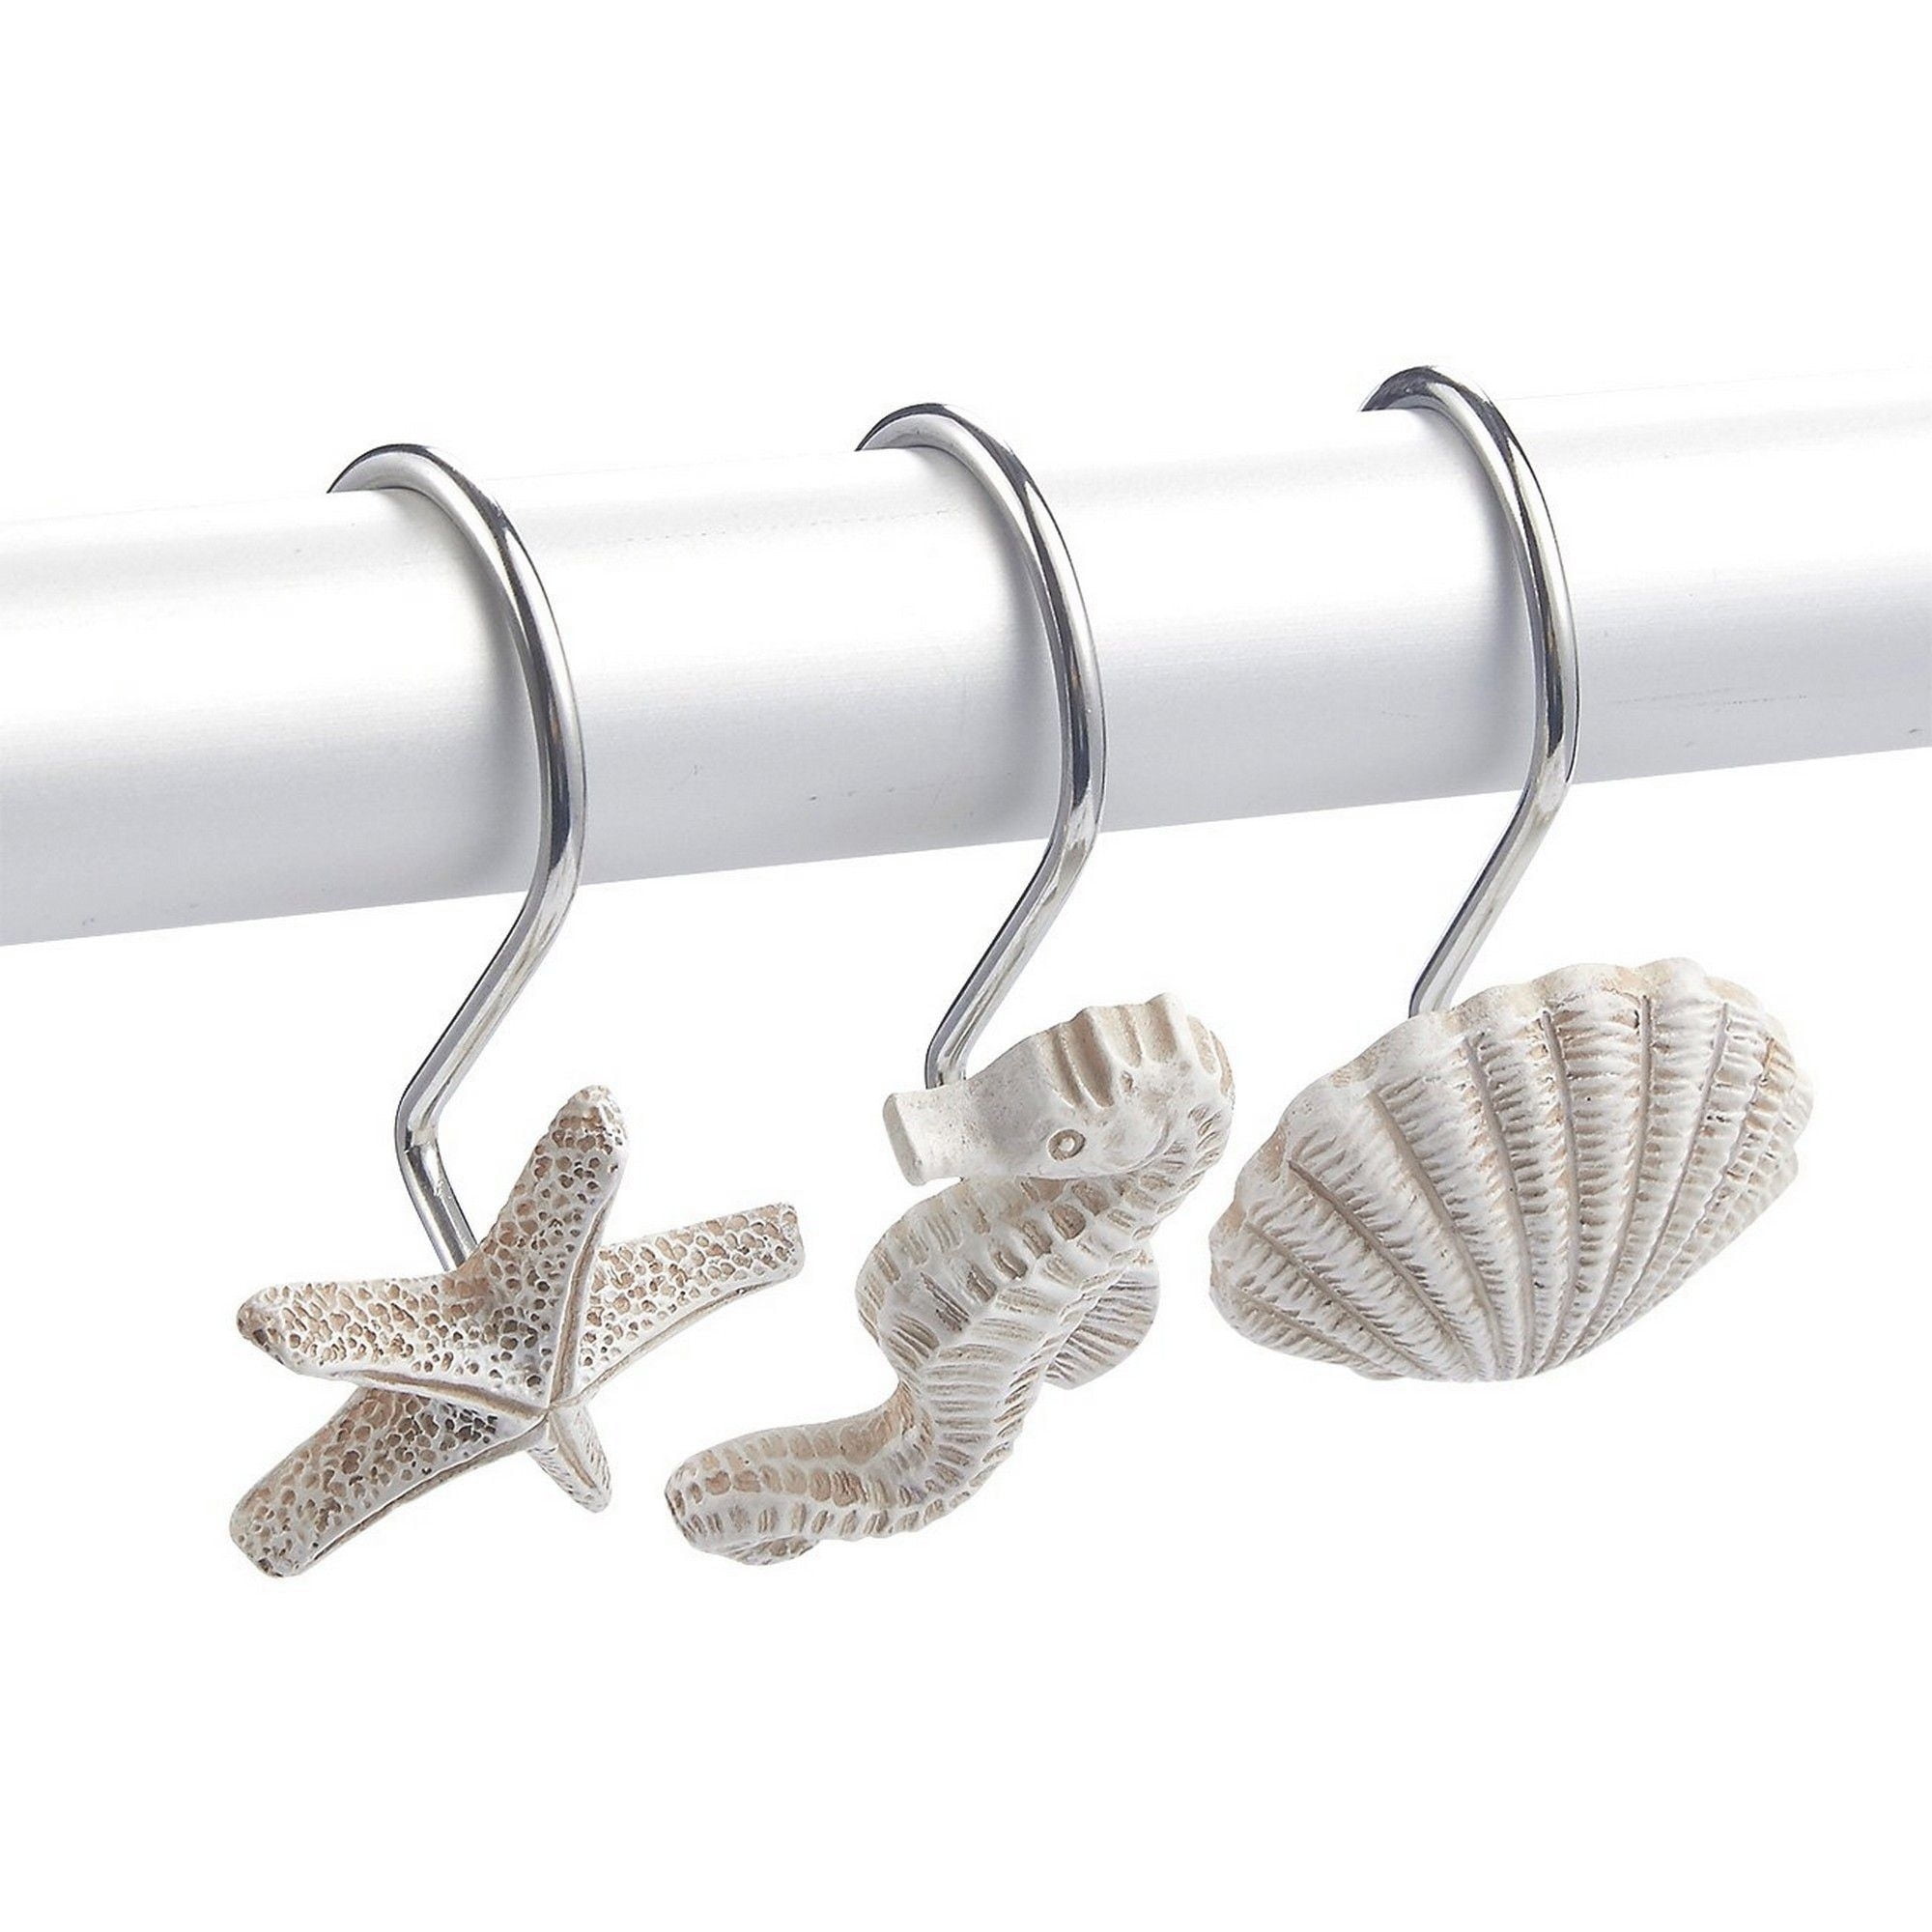 12-Pack of Beach-Themed Shower Curtain Stainless Steel Hooks